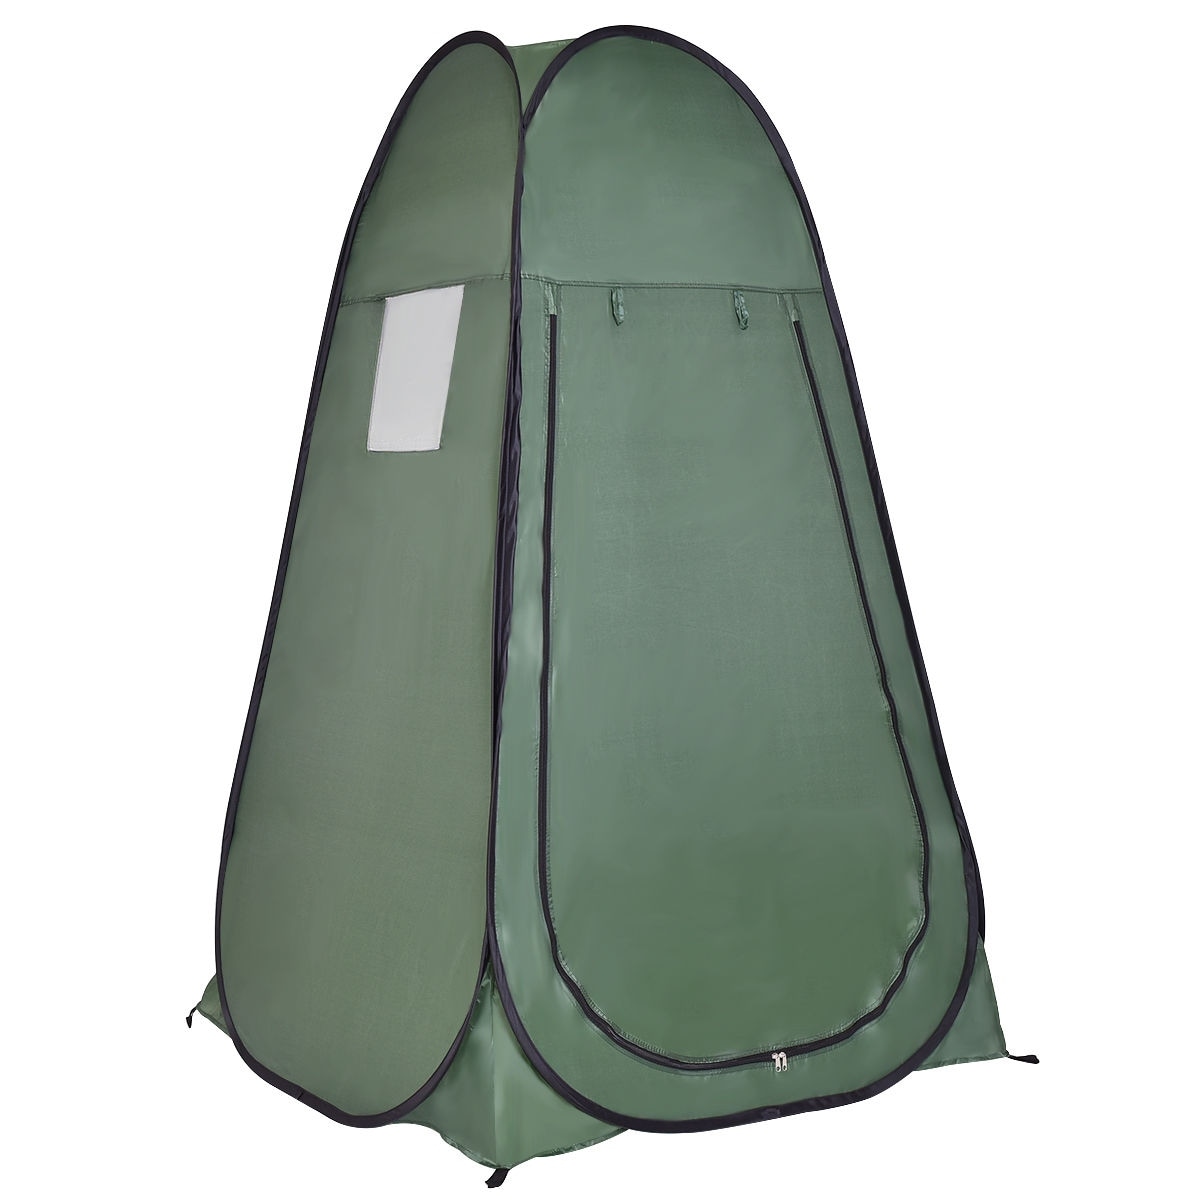 Portable Pop up Camp Tent Dressing Changing Room-Green - Green